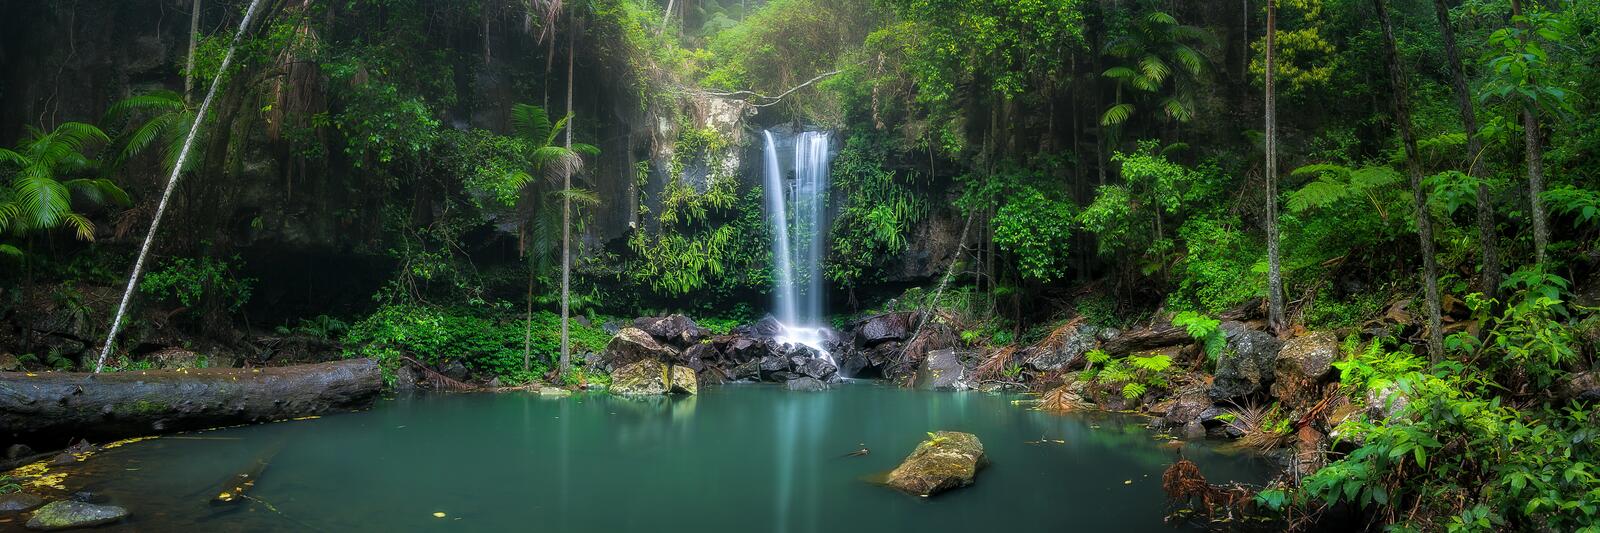 Wallpapers tropical forest waterfall landscape on the desktop